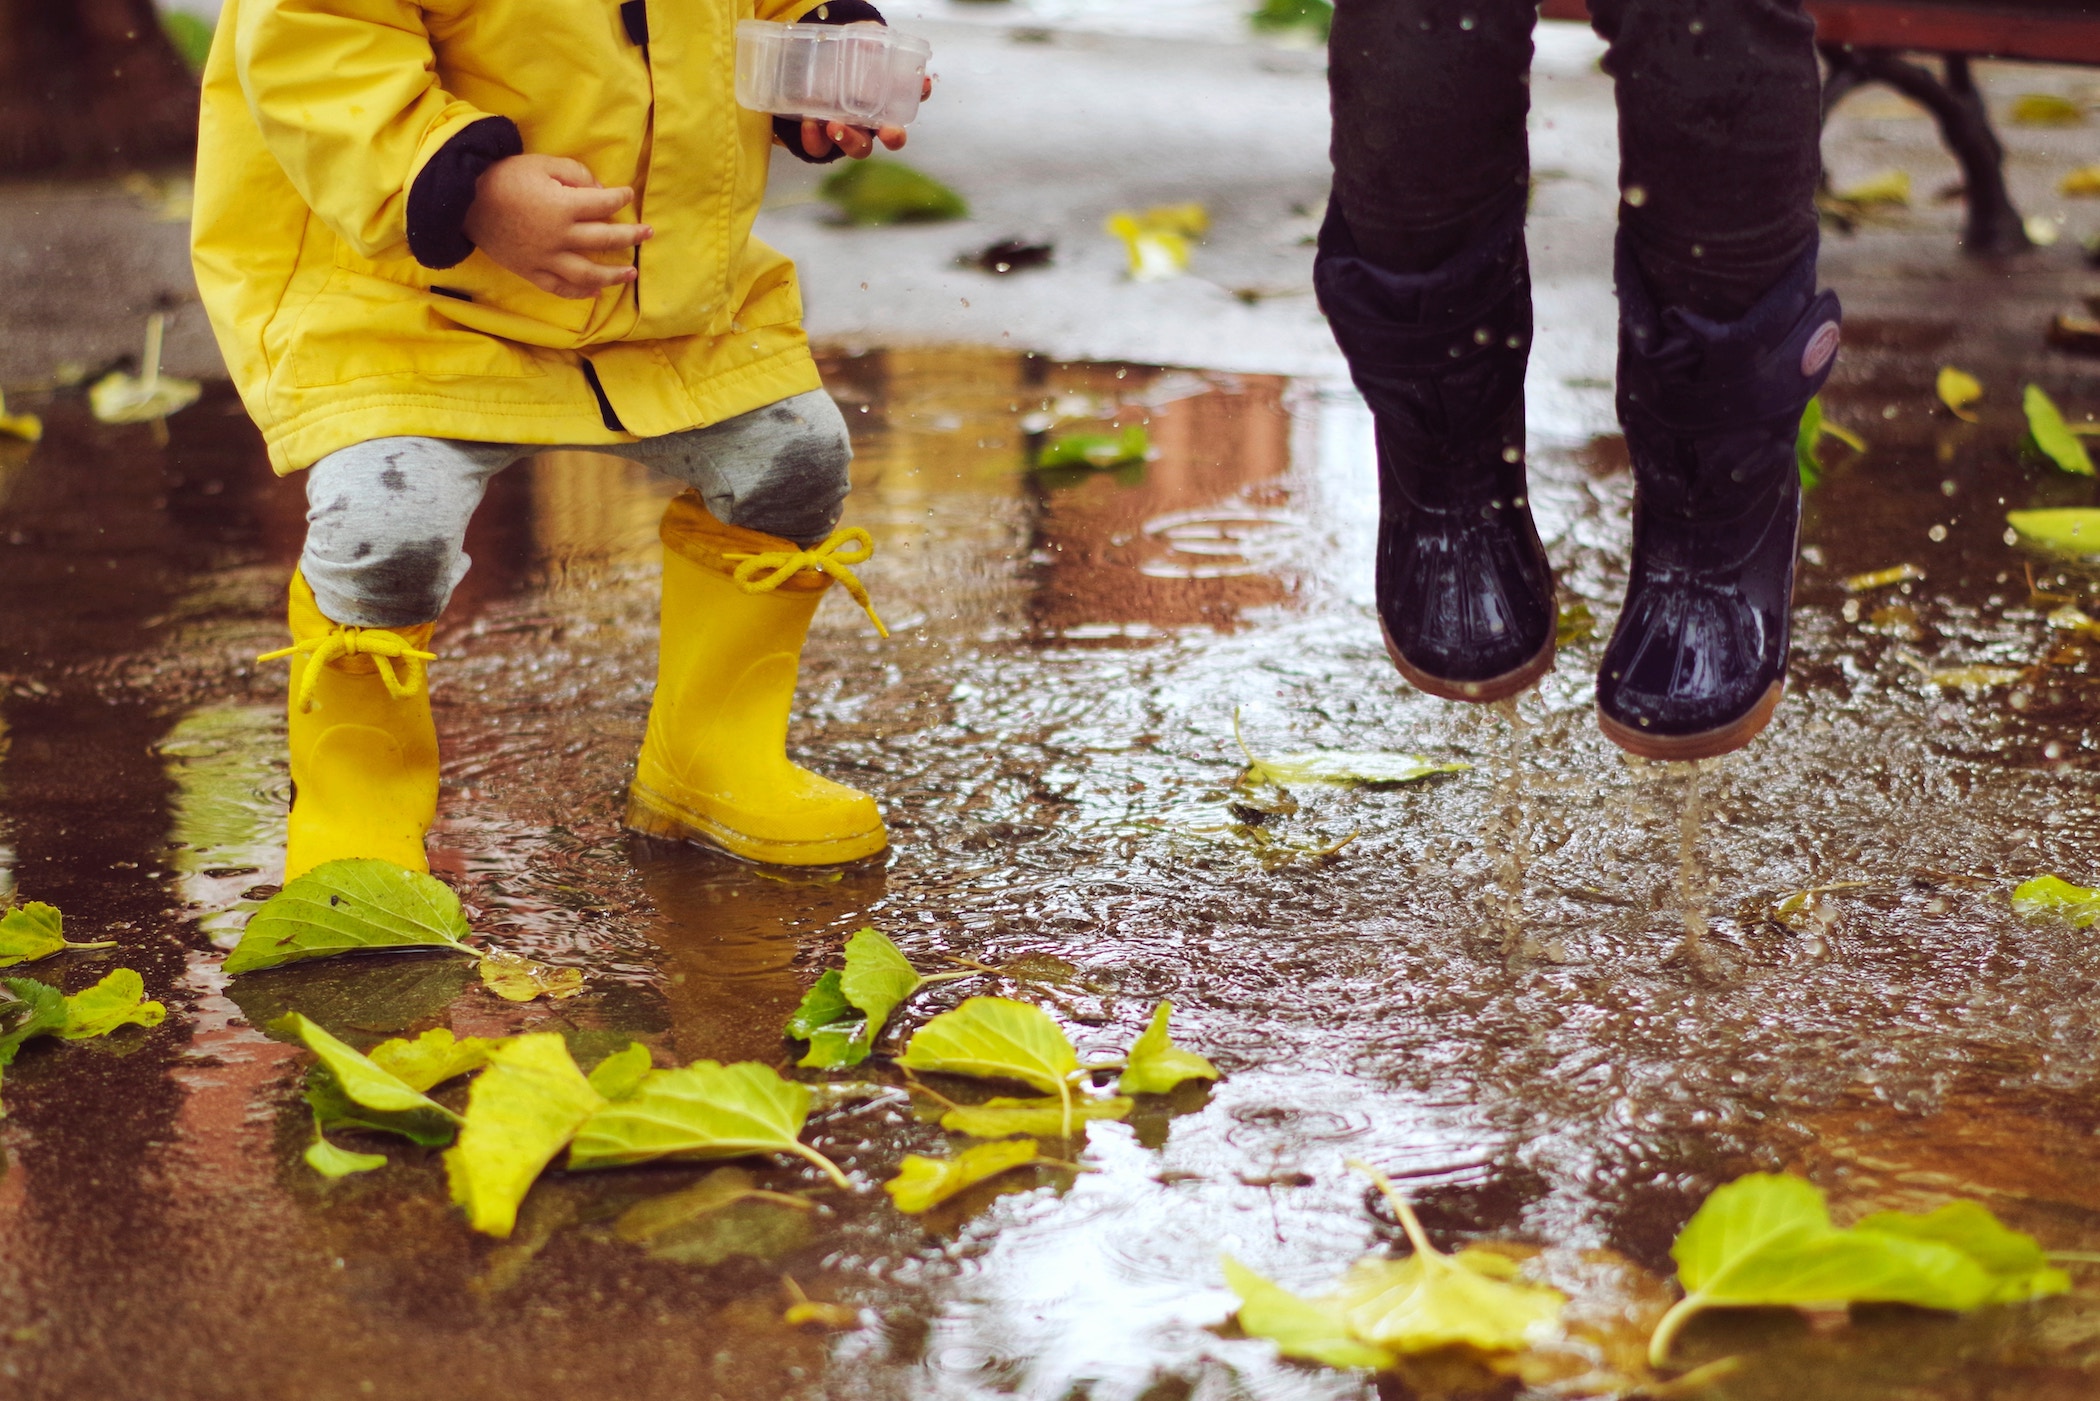 Kids in rain boots splashing in a puddle